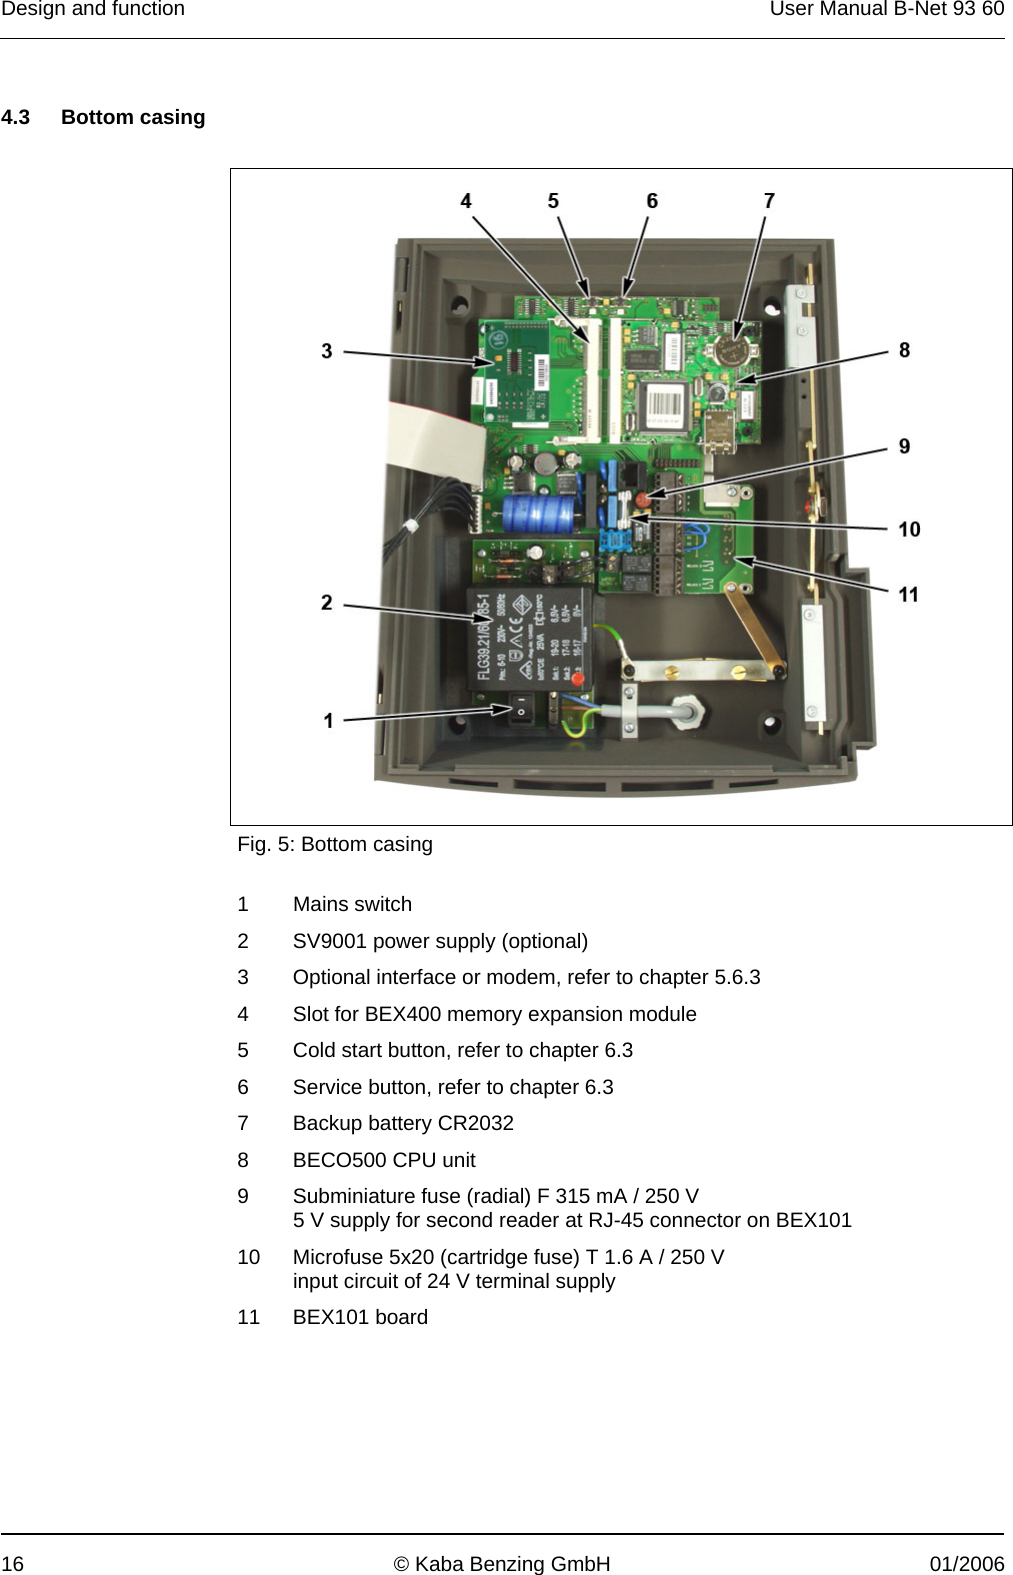 Design and function  User Manual B-Net 93 60 16  © Kaba Benzing GmbH  01/2006   4.3 Bottom casing    Fig. 5: Bottom casing  1 Mains switch 2  SV9001 power supply (optional) 3  Optional interface or modem, refer to chapter 5.6.3 4  Slot for BEX400 memory expansion module 5  Cold start button, refer to chapter 6.3 6  Service button, refer to chapter 6.3 7  Backup battery CR2032 8  BECO500 CPU unit 9  Subminiature fuse (radial) F 315 mA / 250 V 5 V supply for second reader at RJ-45 connector on BEX101 10  Microfuse 5x20 (cartridge fuse) T 1.6 A / 250 V input circuit of 24 V terminal supply 11 BEX101 board   